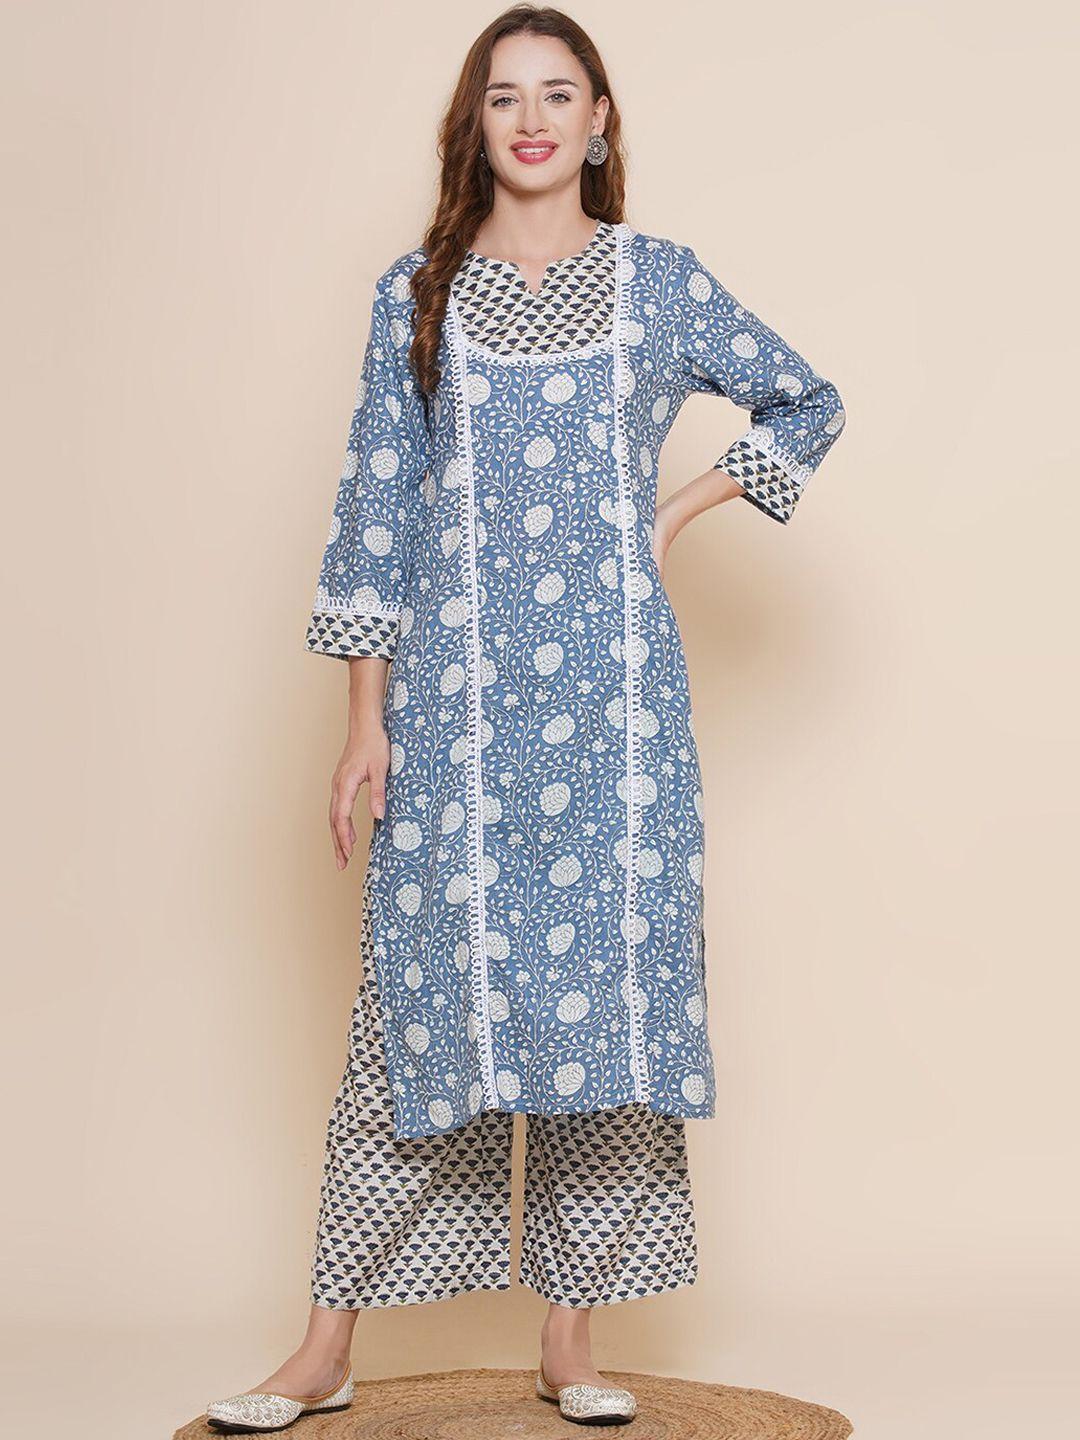 bhama couture floral printed regular thread work pure cotton kurta with palazzos